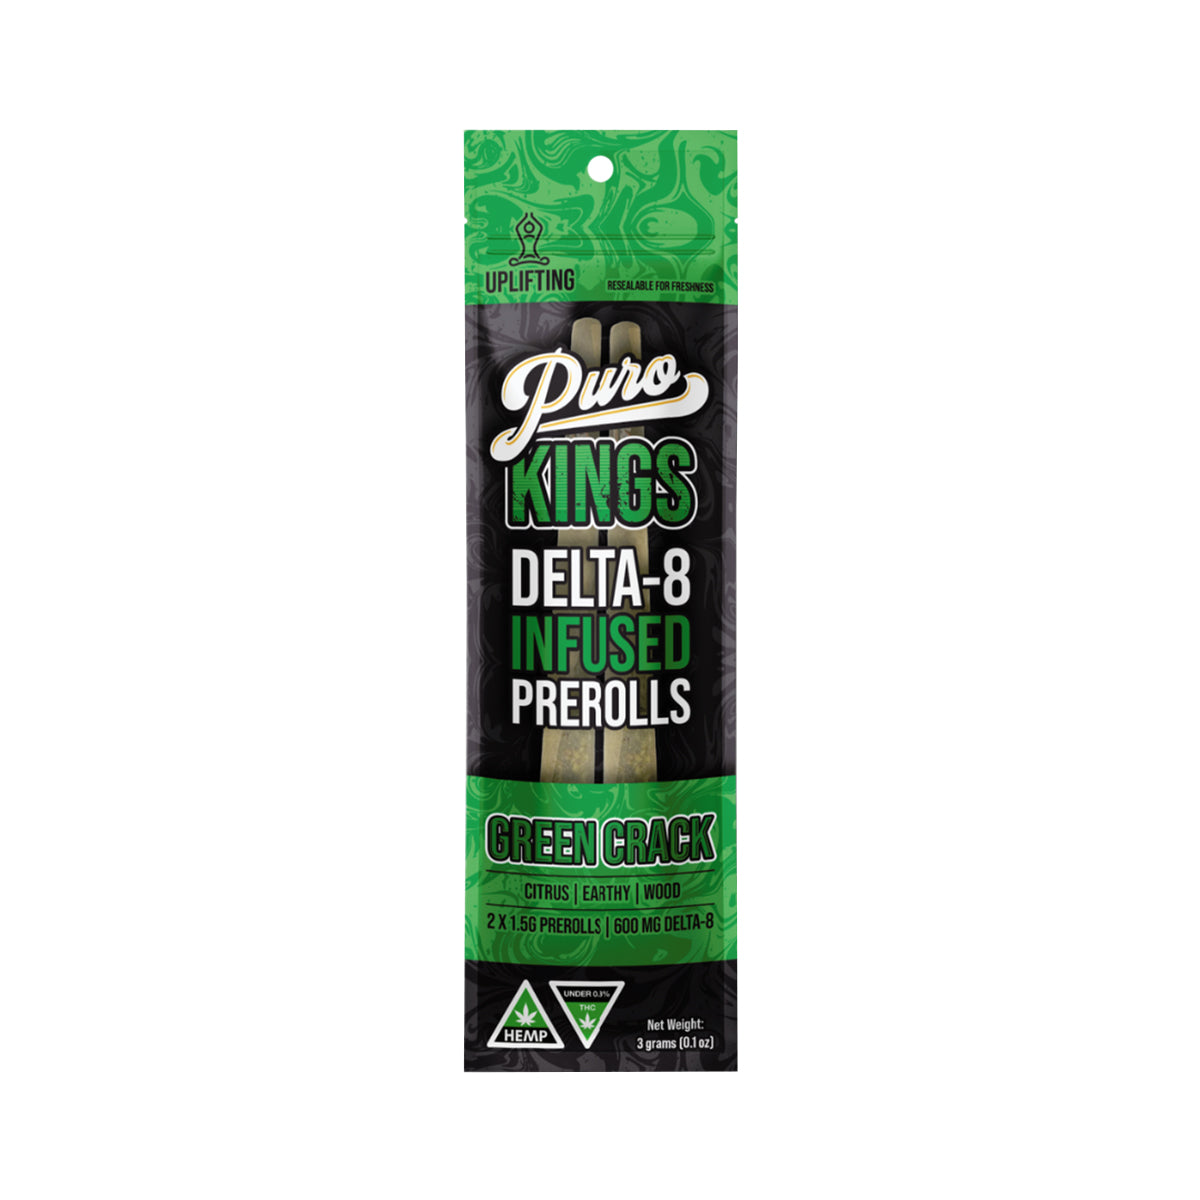 Puro Kings Delta-8 Infused Pre-Rolls 2pc 3g Best Price